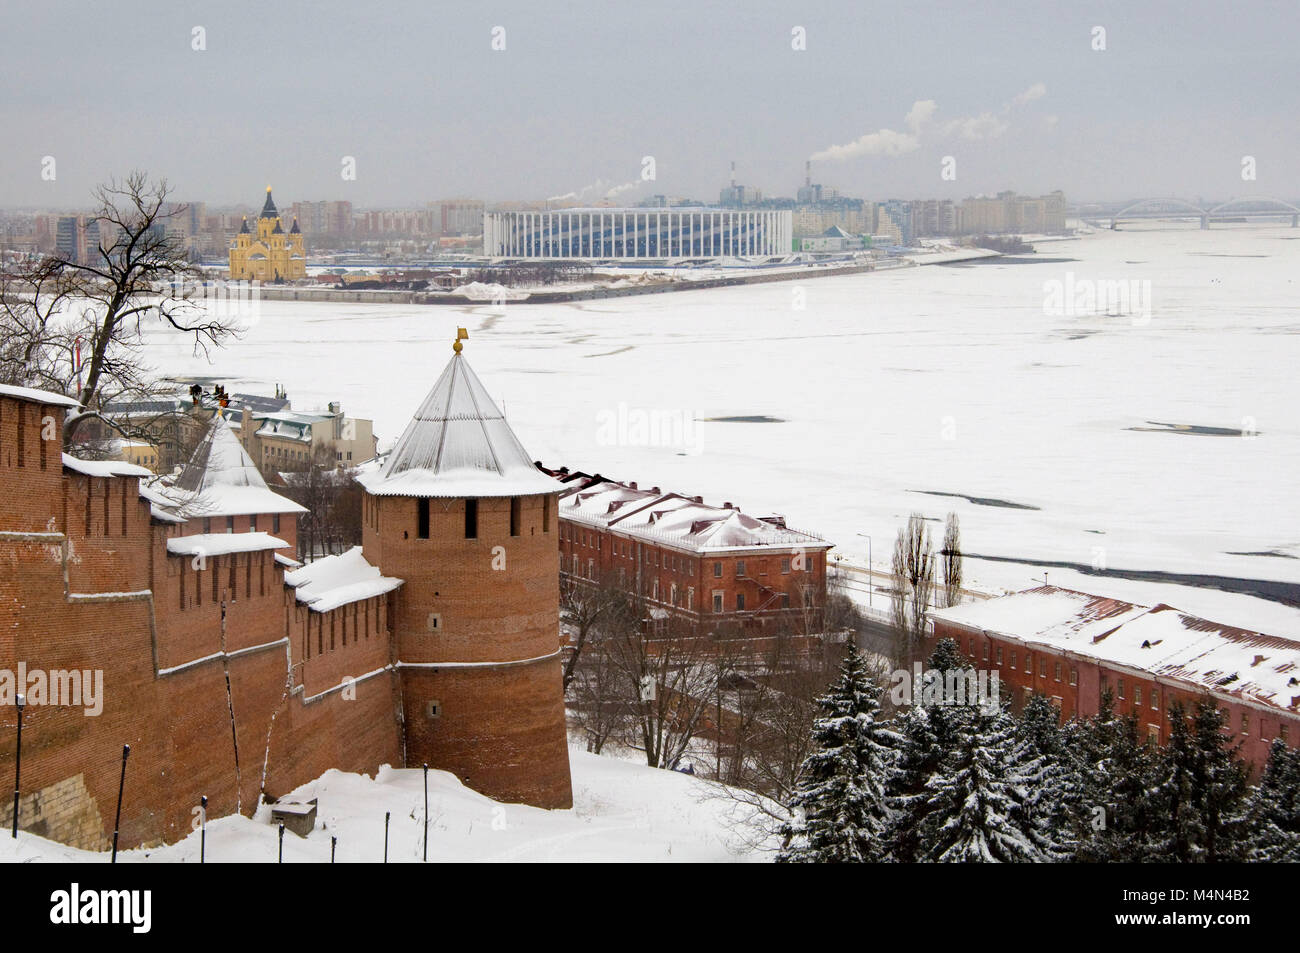 The kremlin of Nizhny Novgorod, Russia, with its World Cup stadium in the background Stock Photo